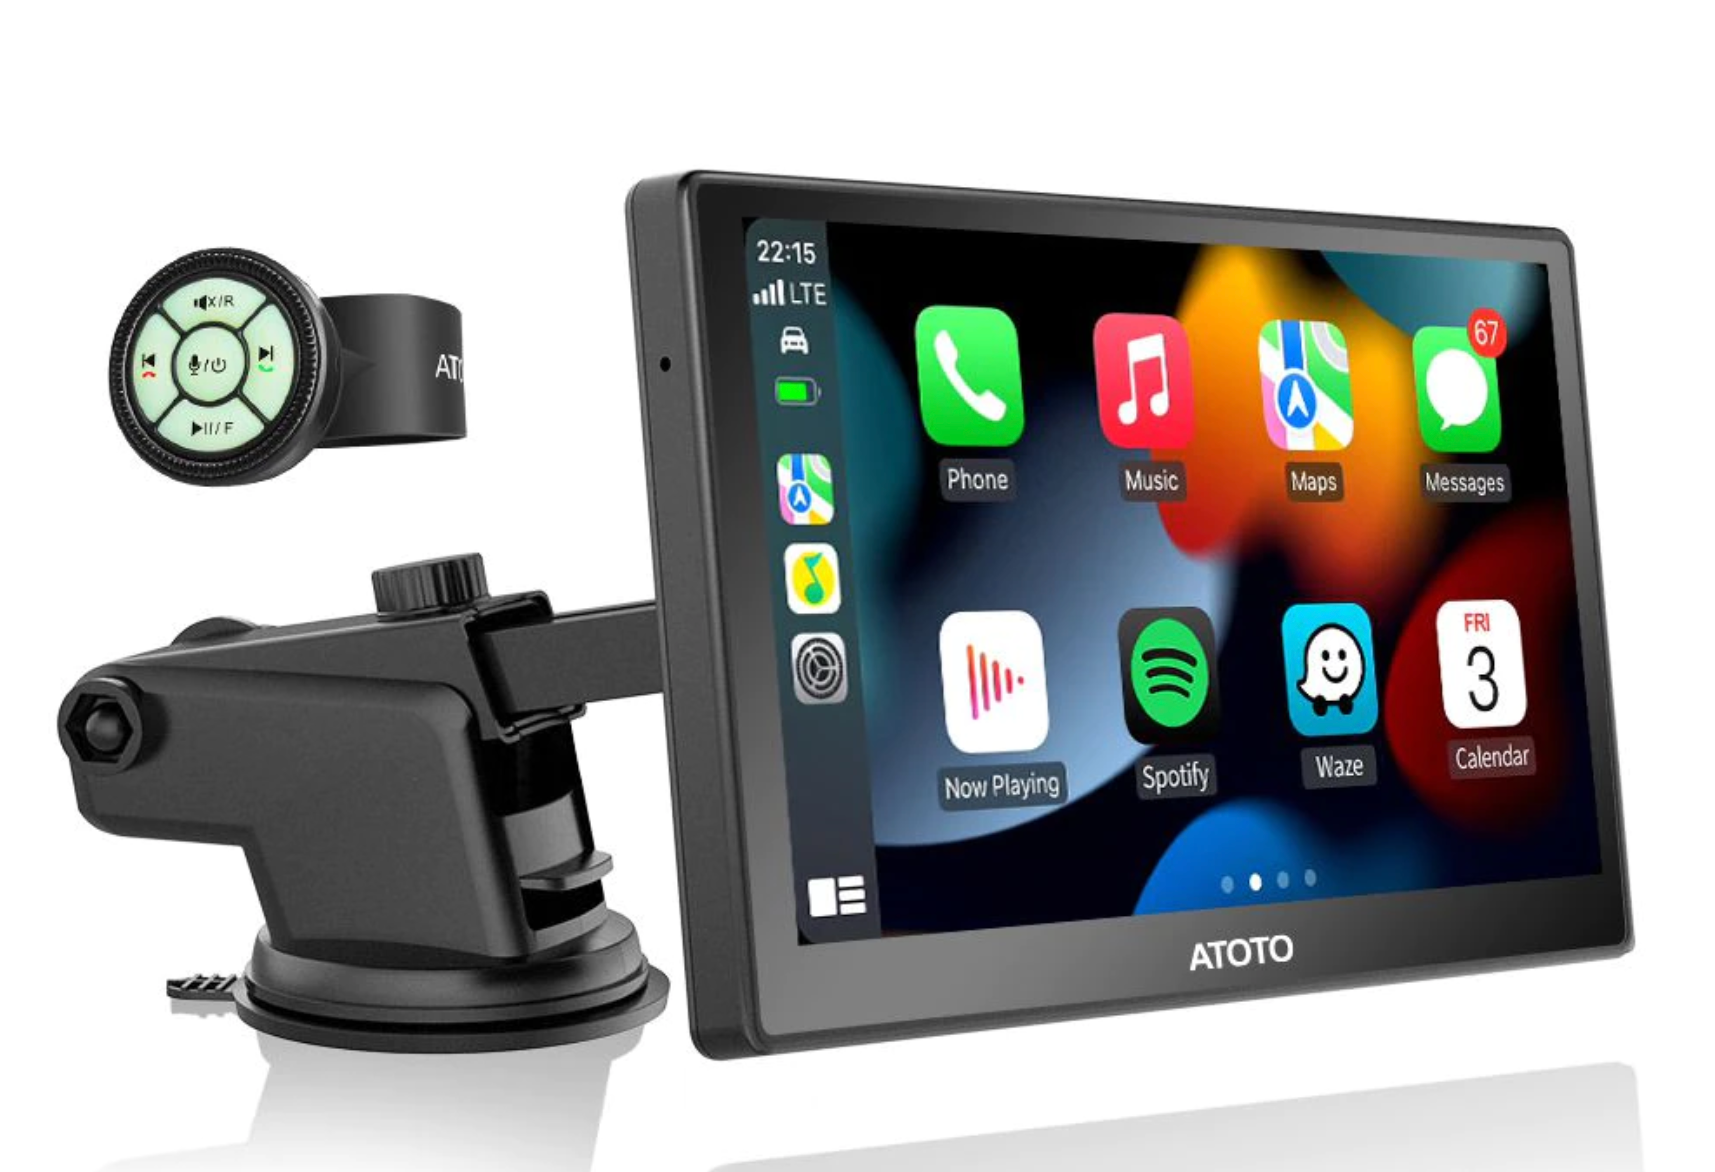 ATOTO P8 PRO P807PR  7", HD QLED Screen, Wireless AA & CP, 1080p Dash Camera, 1080p Back Up Camera, 2GB Memory Built-In, SD Card Slot, AUX Audio Output, FM Transmitter Built-In, Included Steering Wheel Remote, 1 Year Warranty